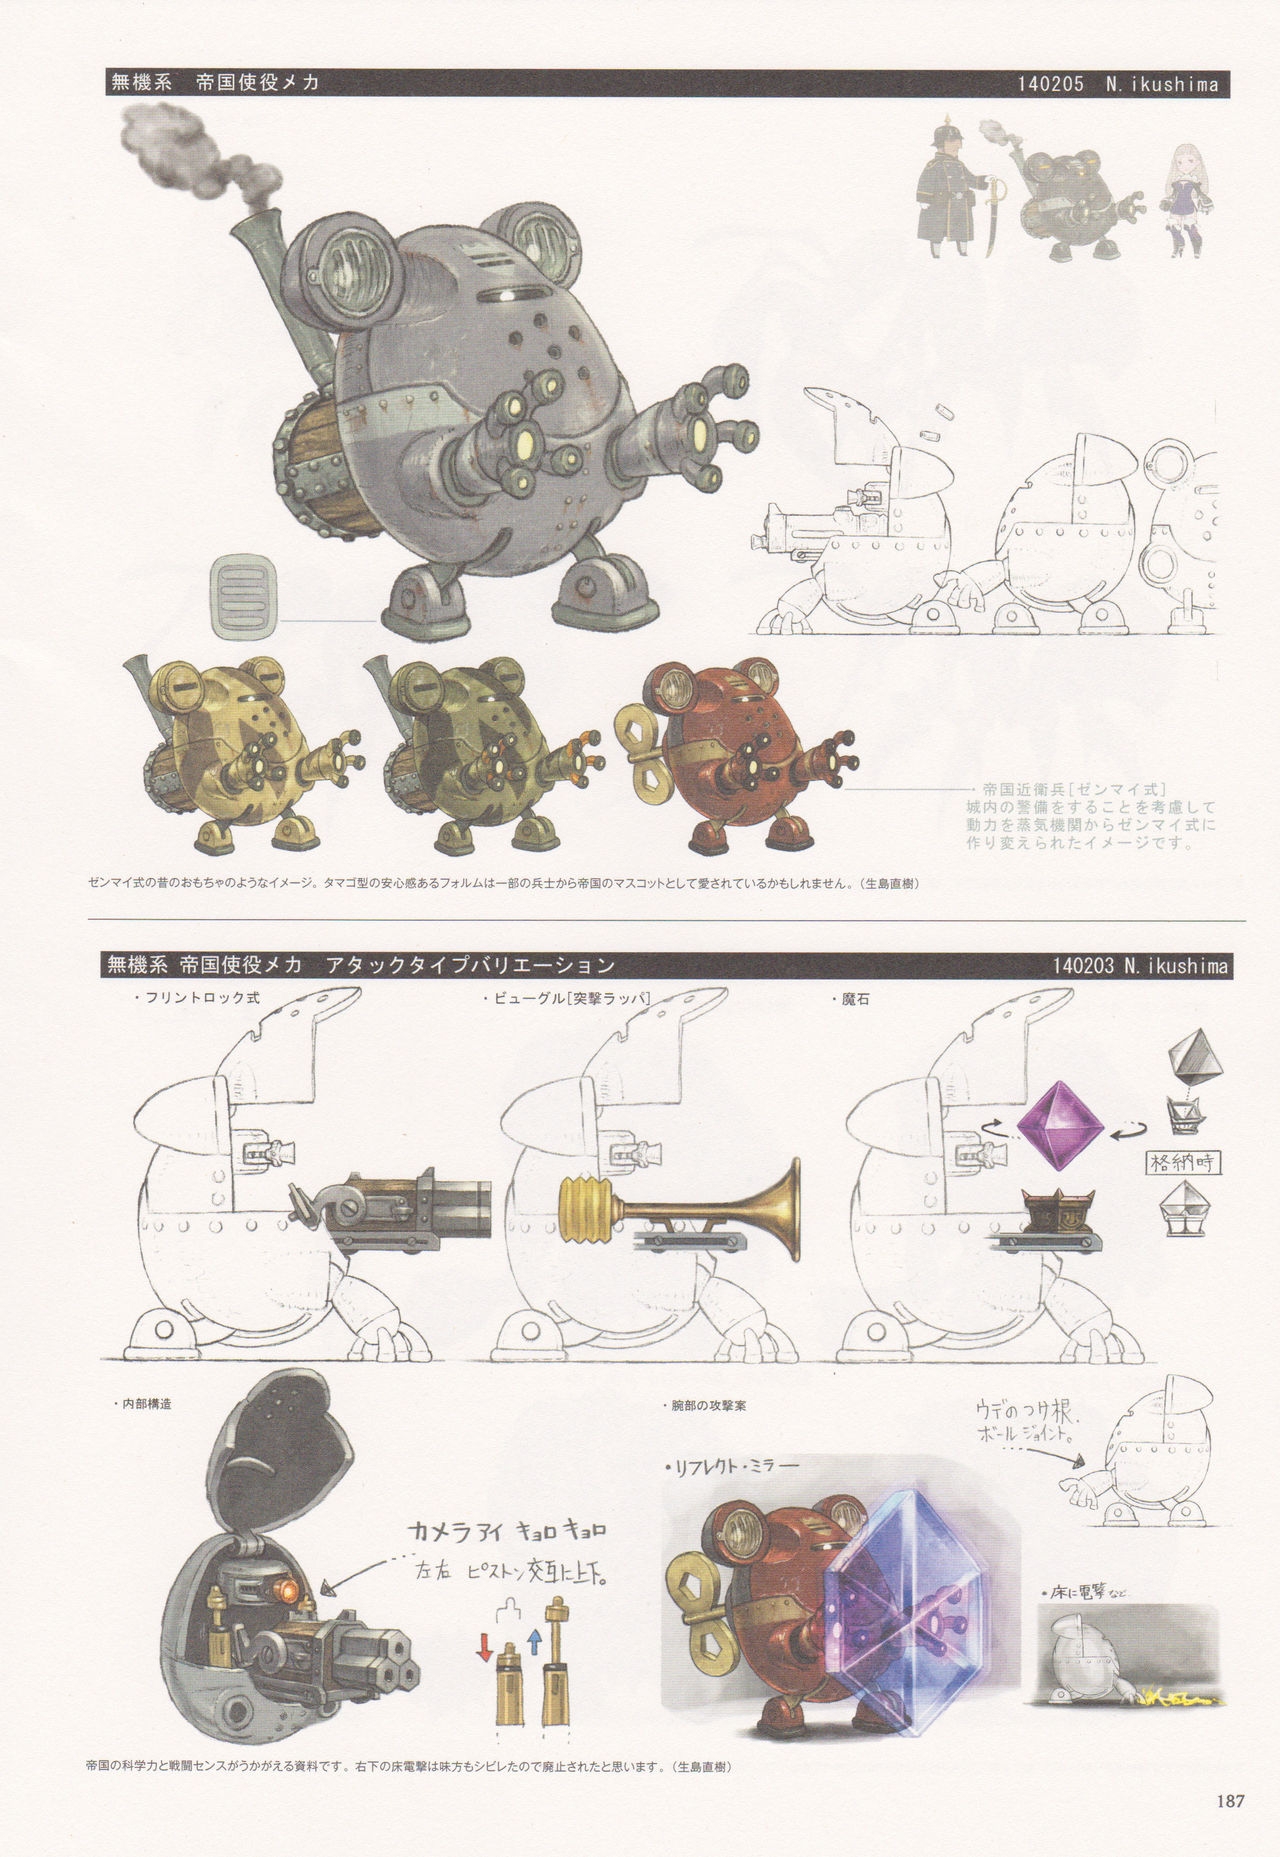 Bravely Second - End Layer - Design Works THE ART OF BRAVELY 2013-2015 187